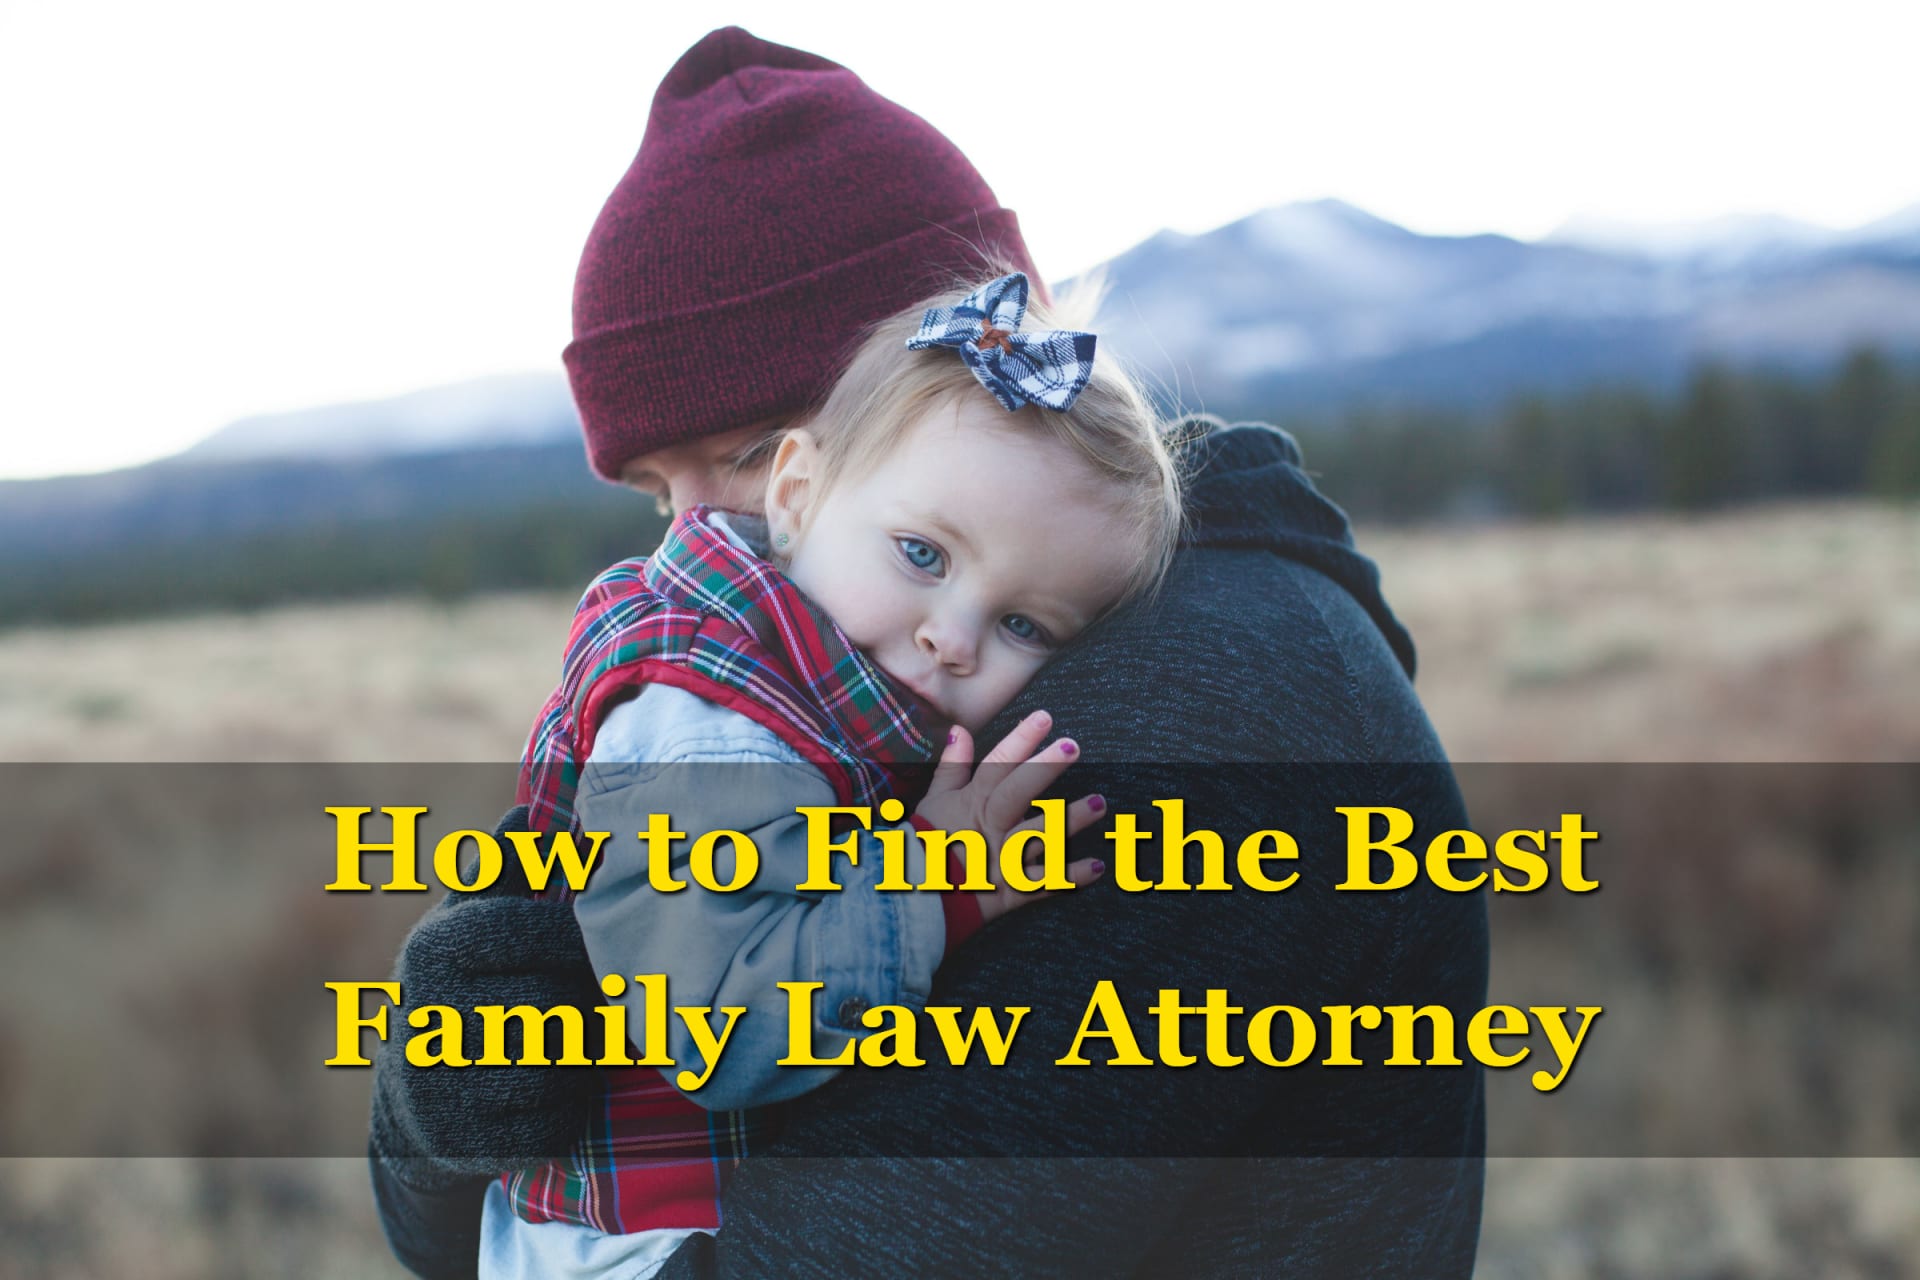 A parent and their child hoping to find a good family law attorney